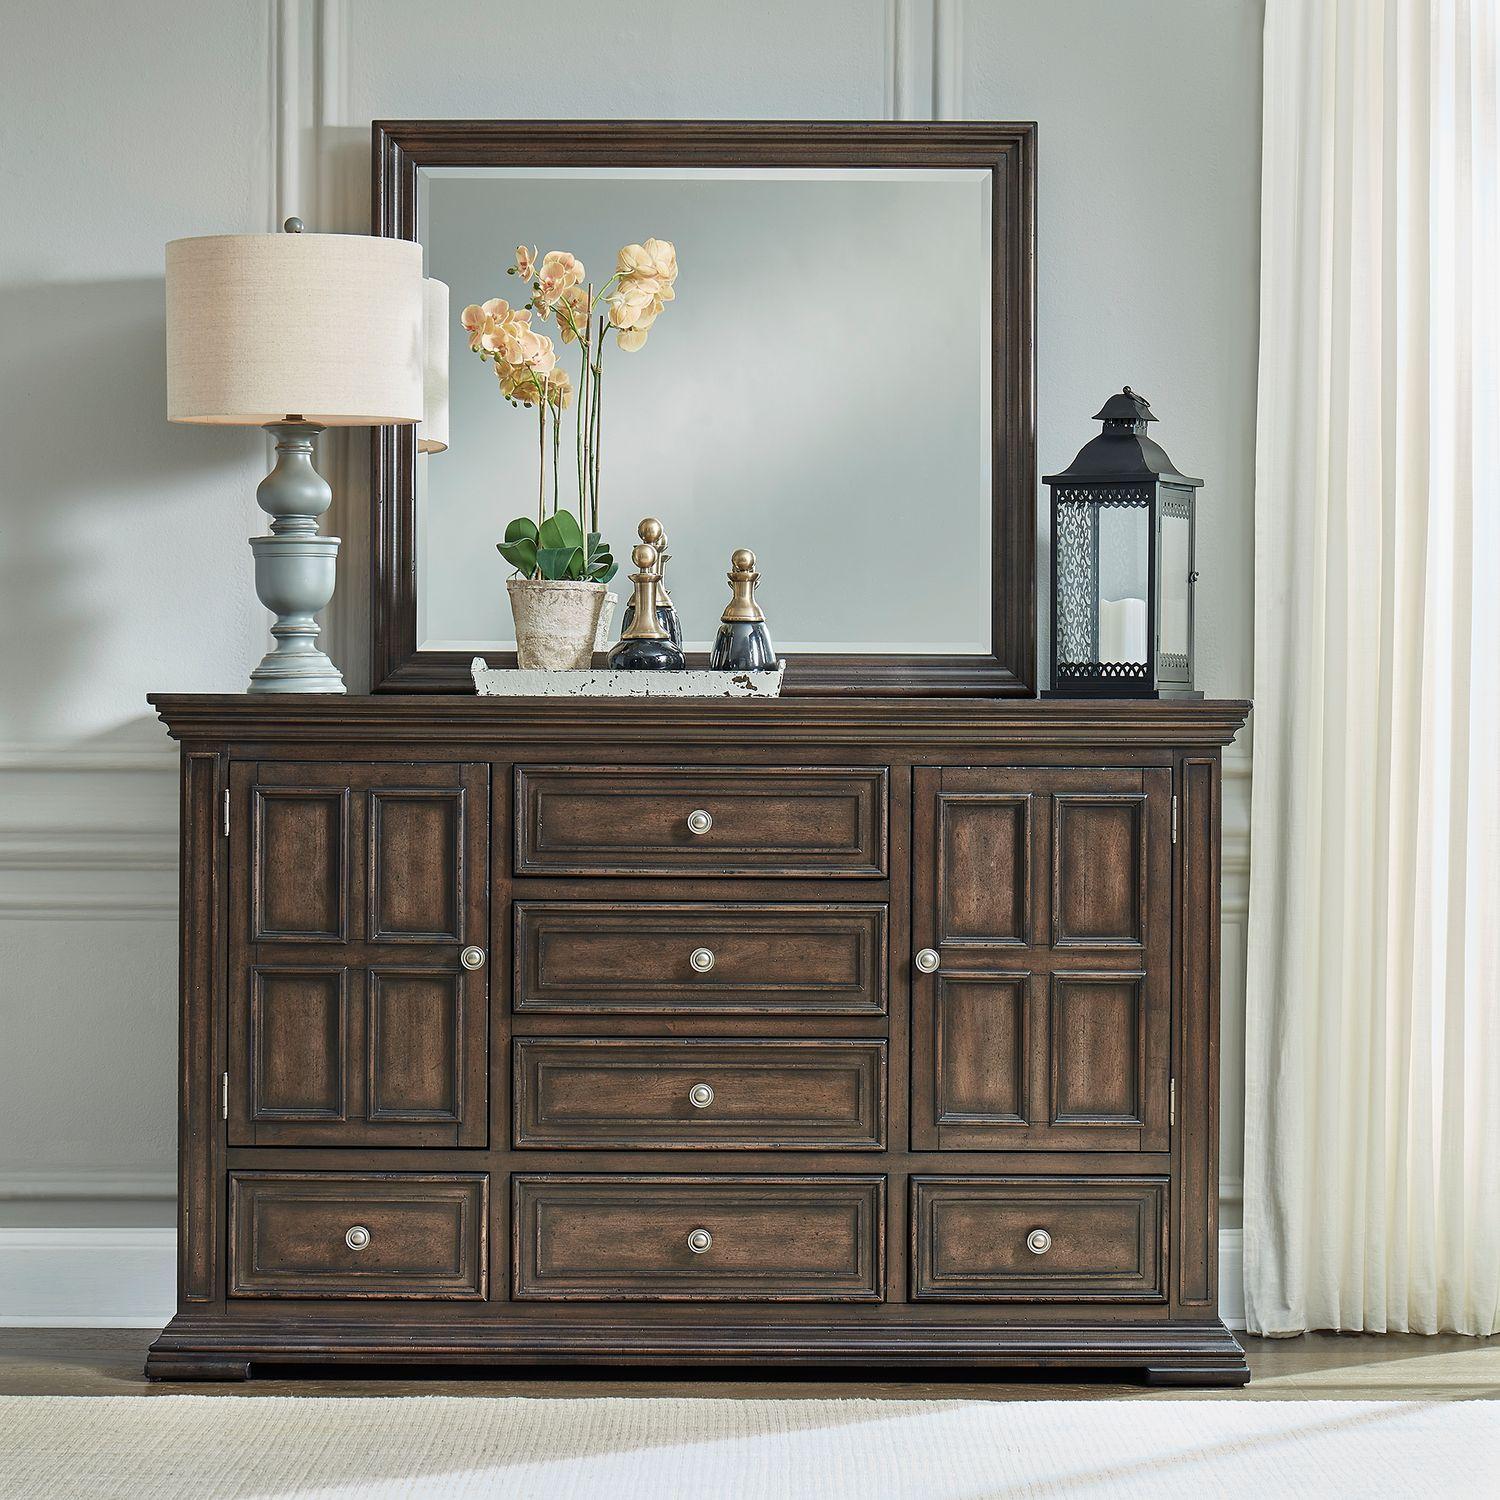 Transitional Dresser With Mirror Big Valley (361-BR) 361-BR-DM in Brown 